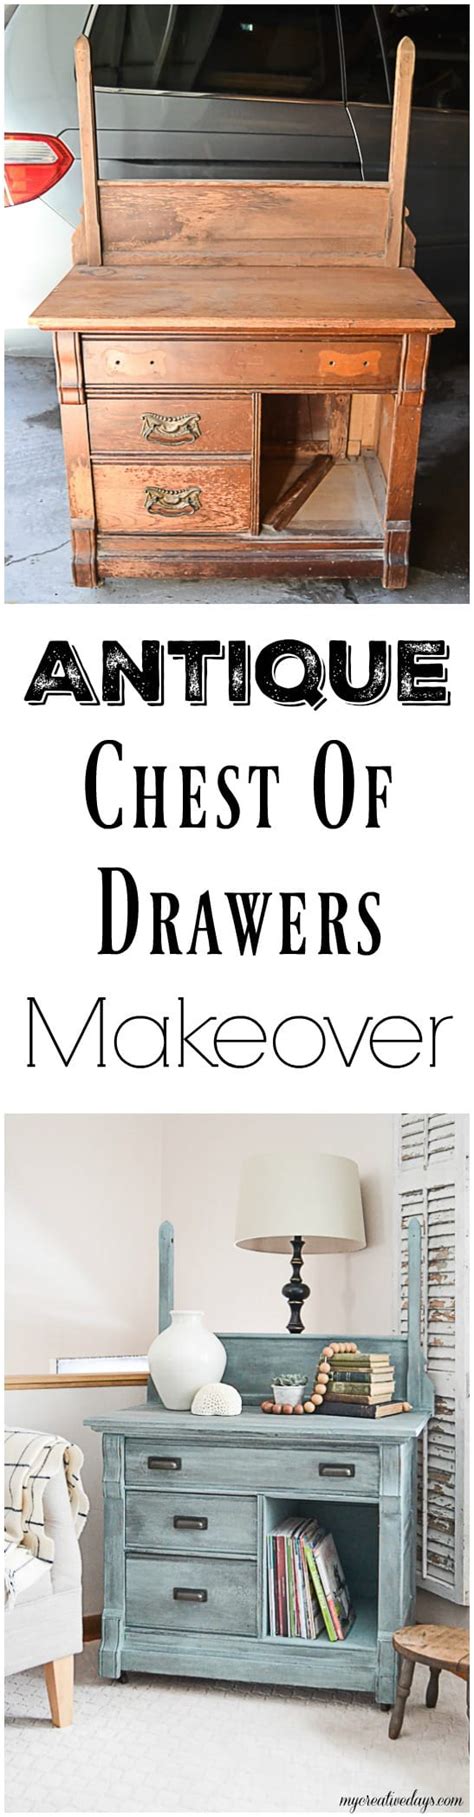 Antique Chest Of Drawers Makeover With Paint and Black Stain.